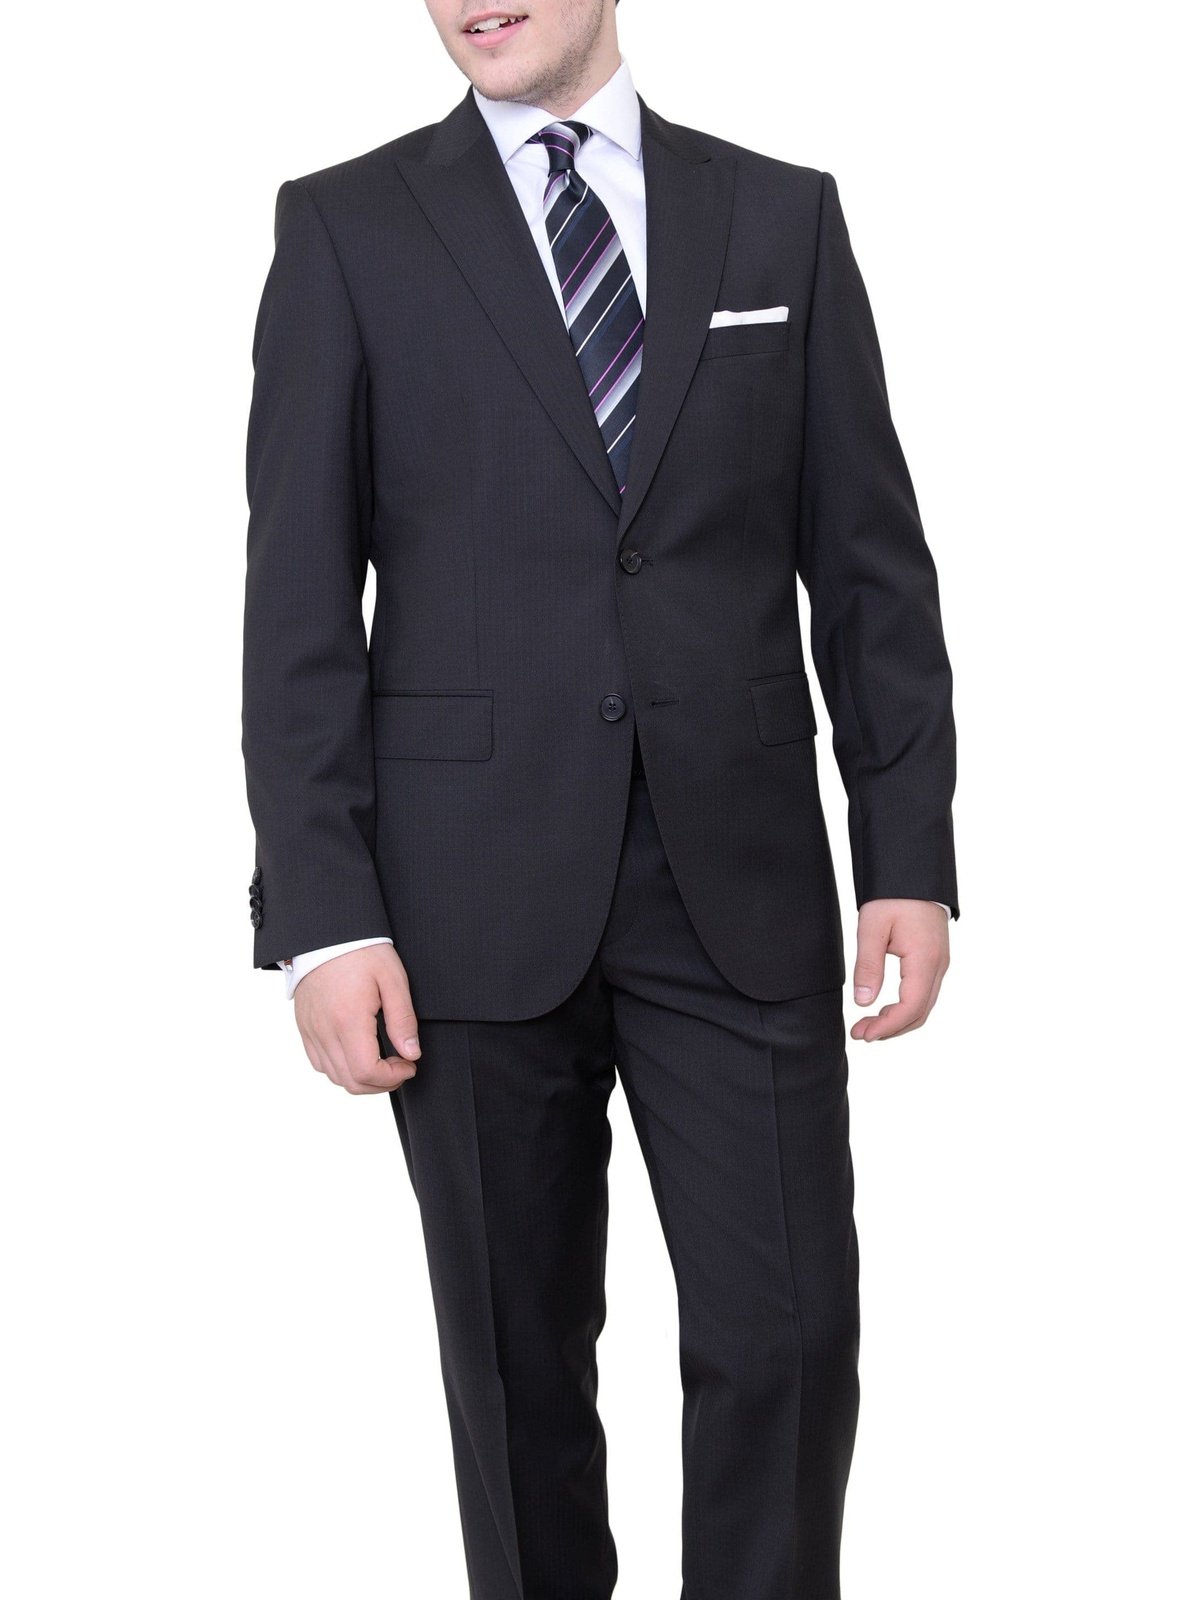 Hugo Boss Thefordham/central Black Tonal Striped Wool Suit With Peak | The Depot